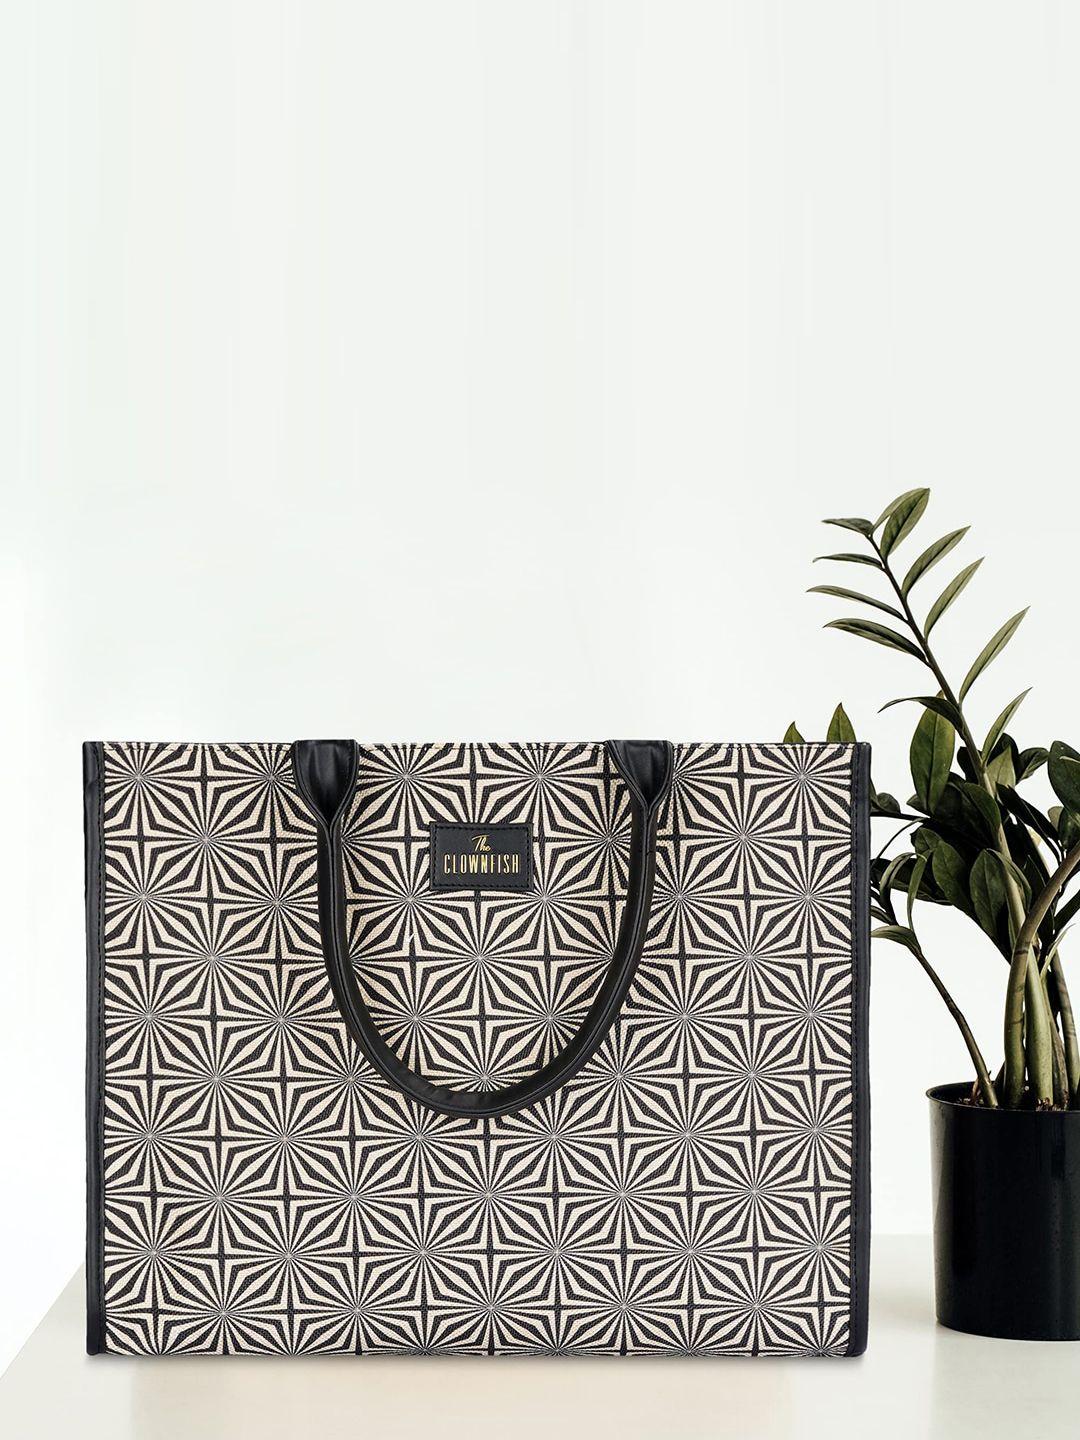 the clownfish geometric printed structured swagger shoulder bag